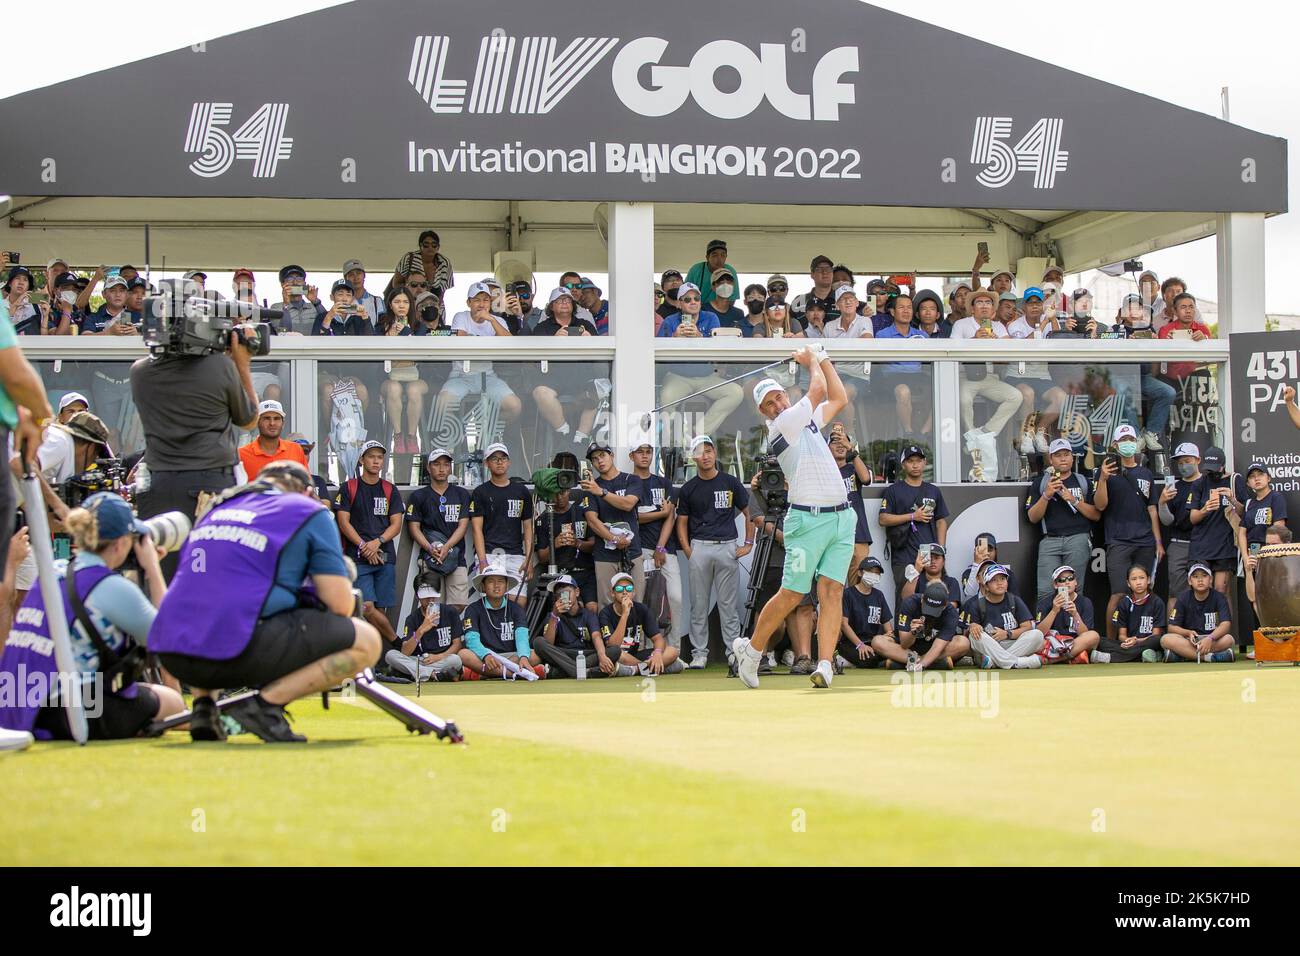 BANGKOK, THAILAND - OCTOBER 9: Richard Bland of England on hole 1 during the third and final round at the LIV GOLF INVITATIONAL BANGKOK at Stonehill Golf Course on October 9, 2022 in Bangkok, THAILAND (Photo by Peter van der Klooster/Alamy Live News) Stock Photo